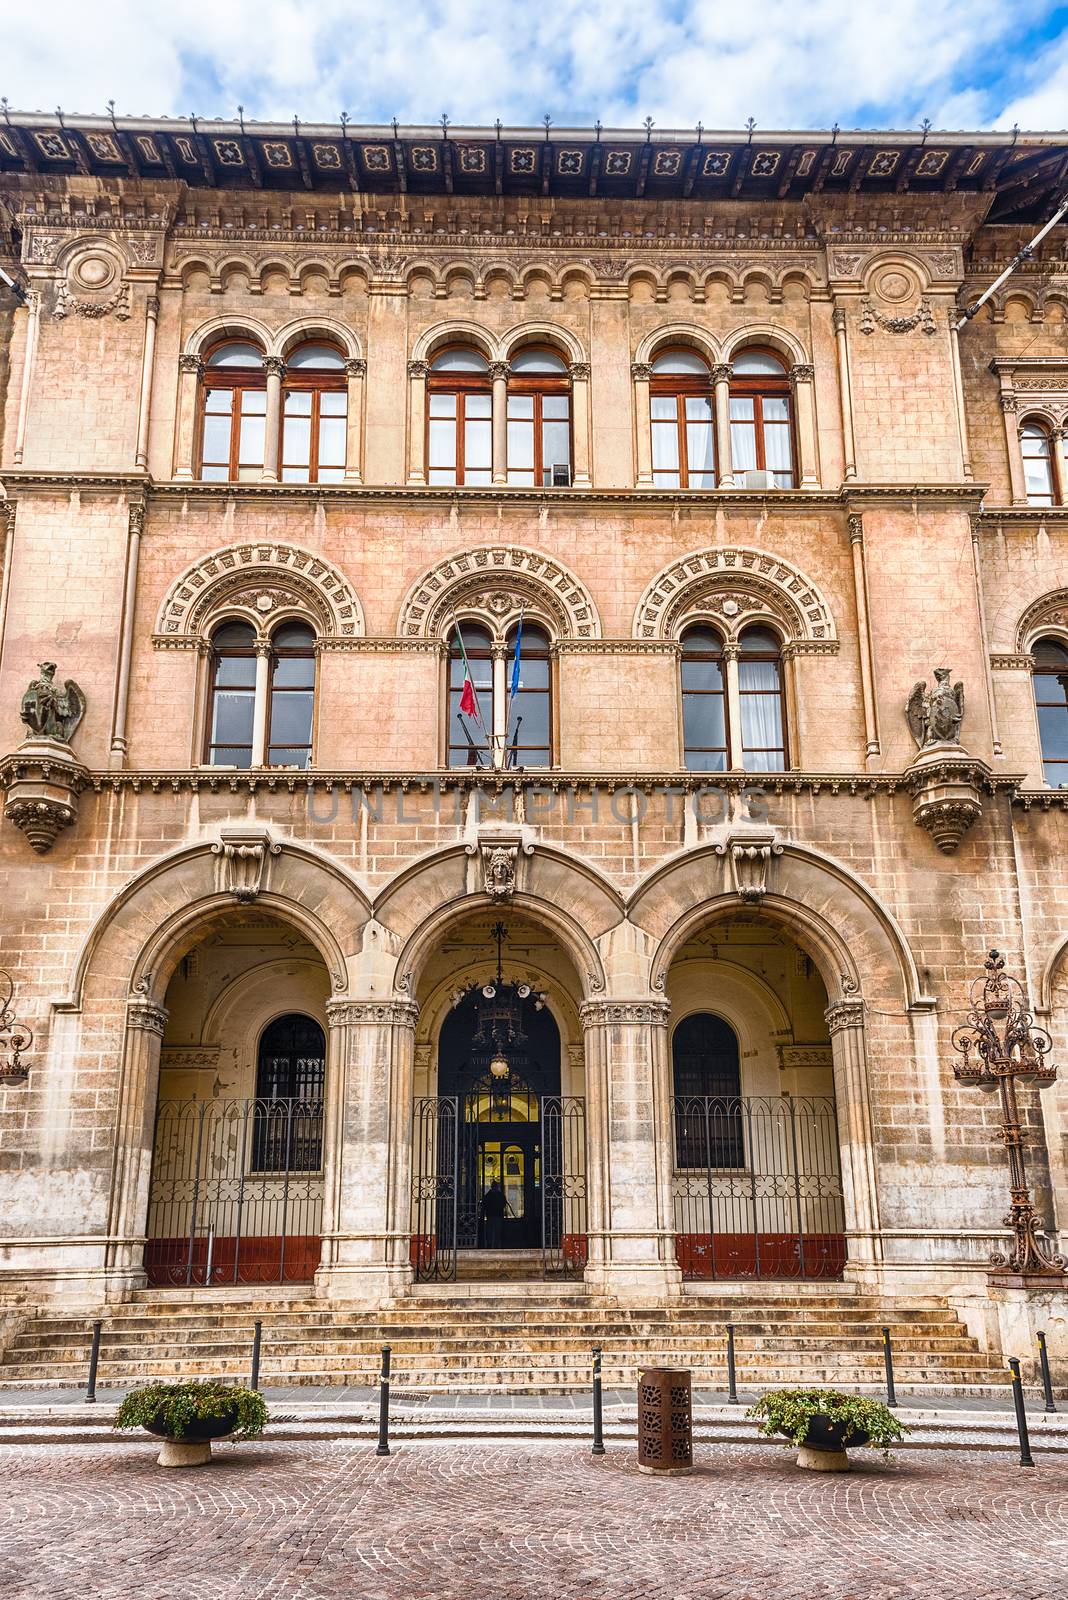 Facade of the Civil Court, historic building in the centre of Perugia, Italy